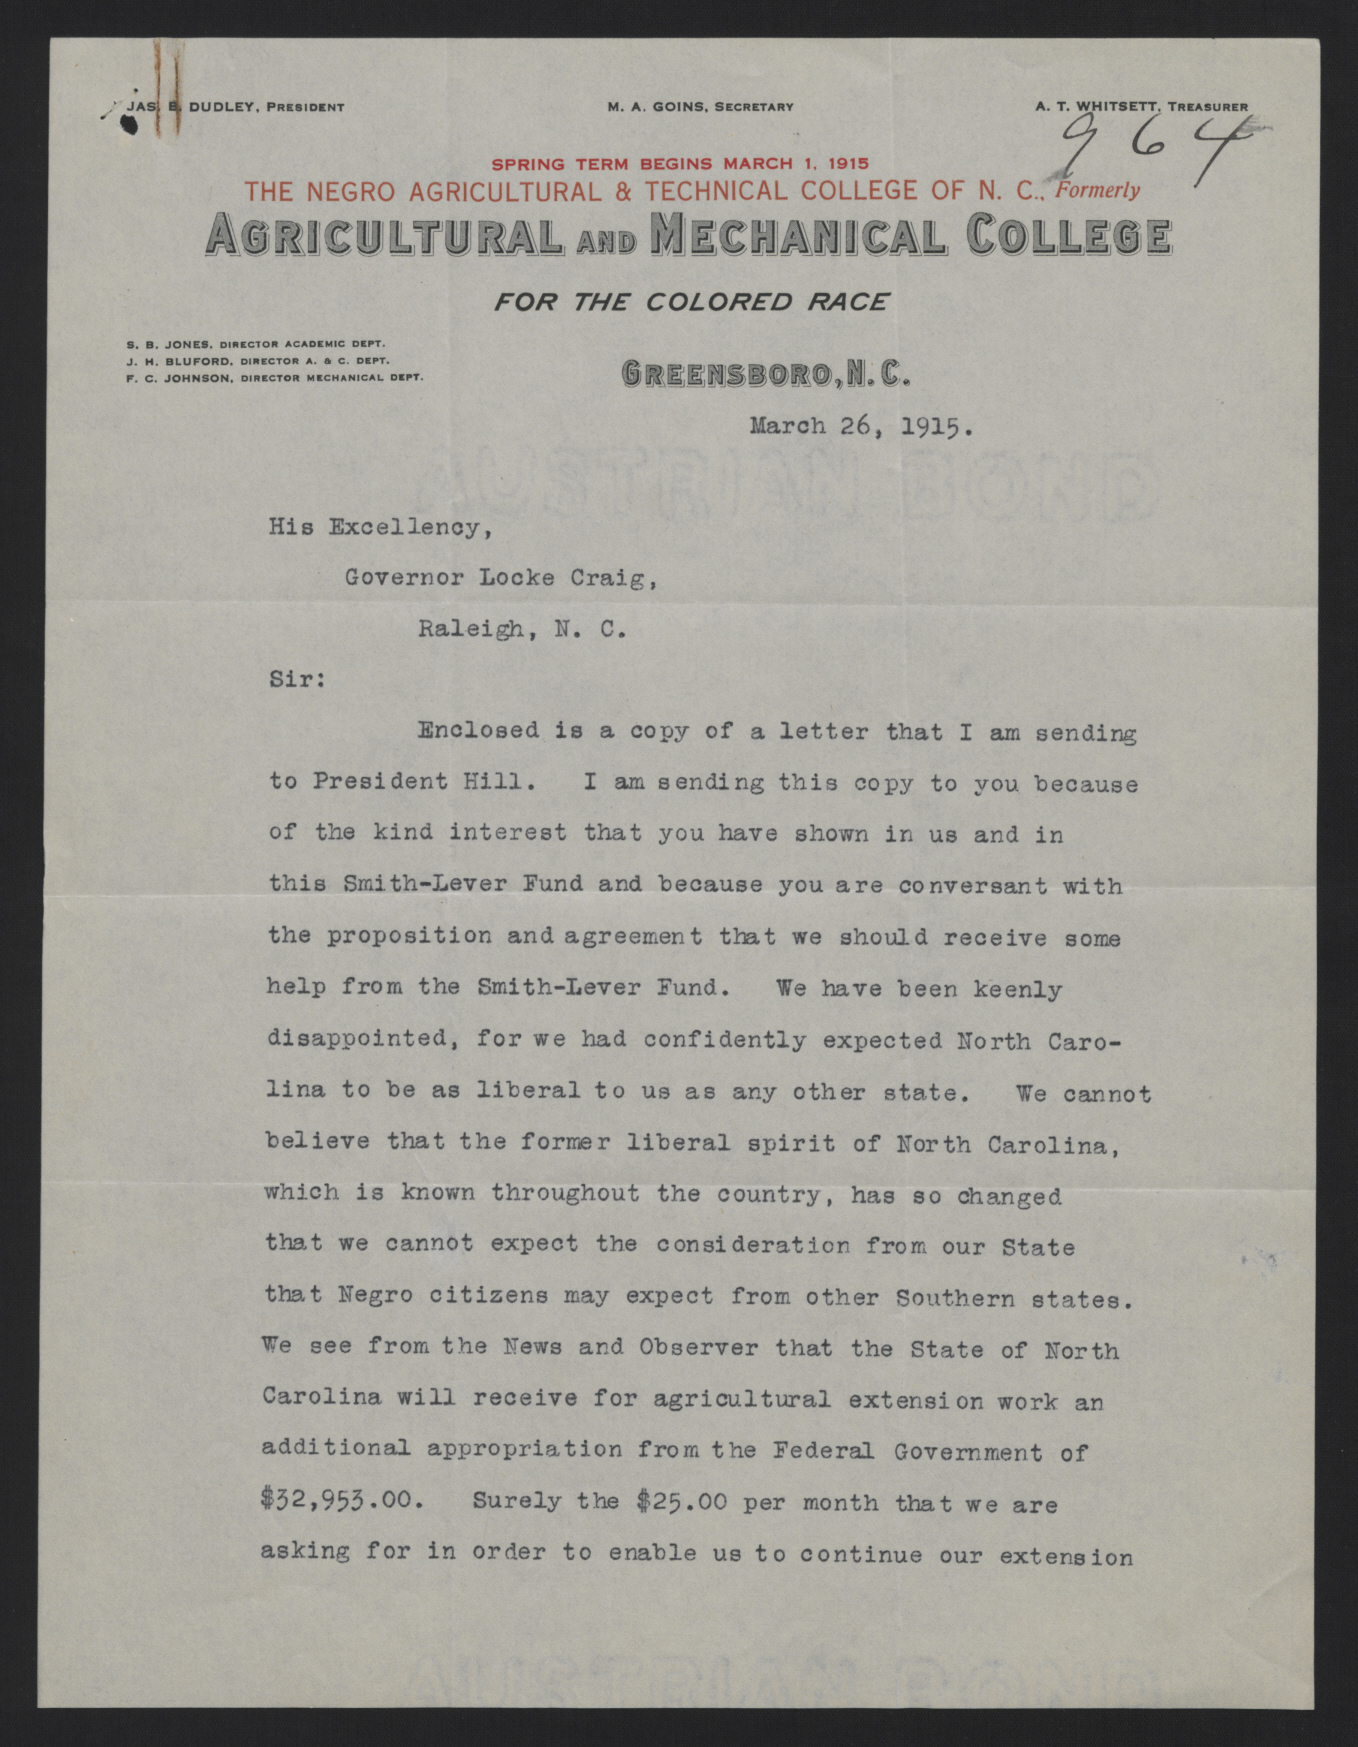 Letter from Dudley to Craig, March 26, 1915